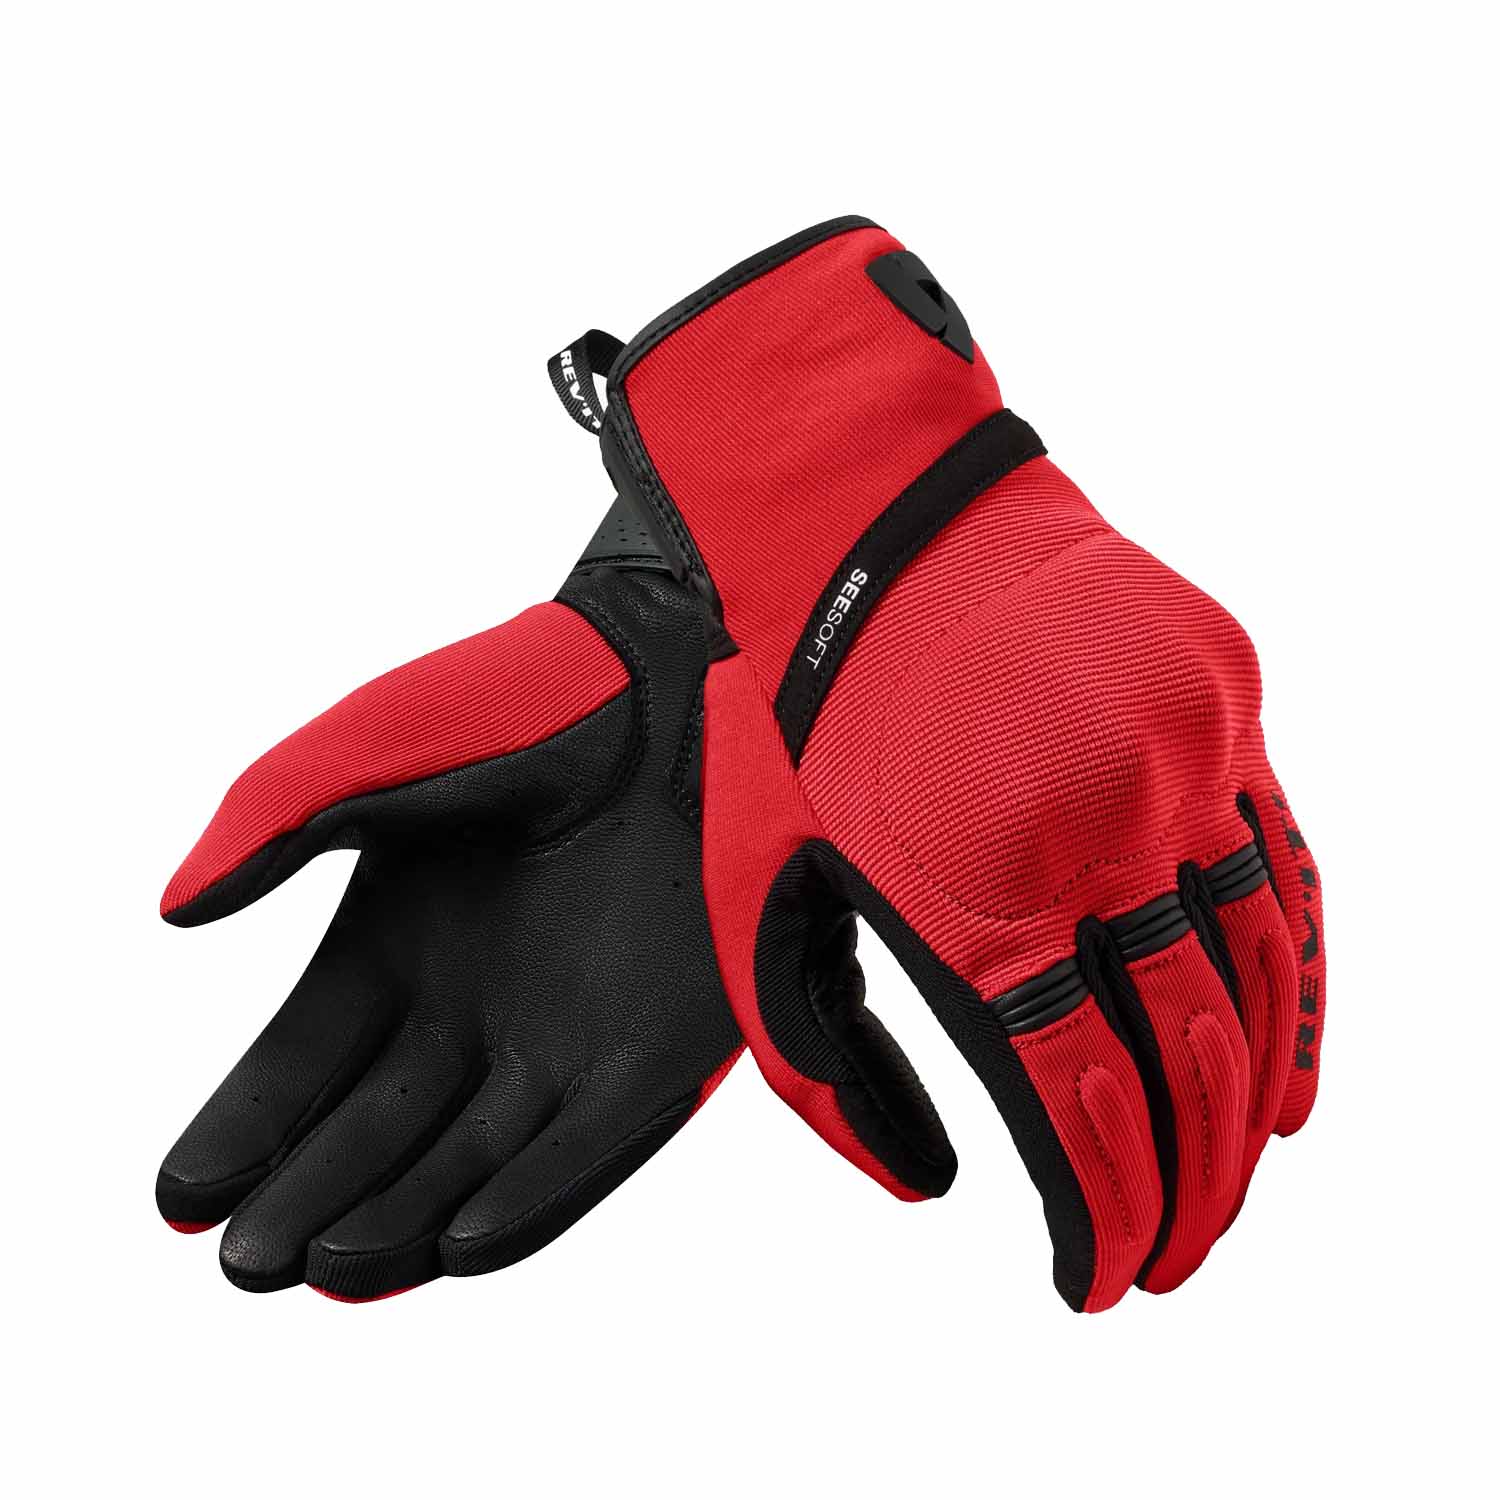 Image of REV'IT! Mosca 2 Gloves Red Black Talla XL